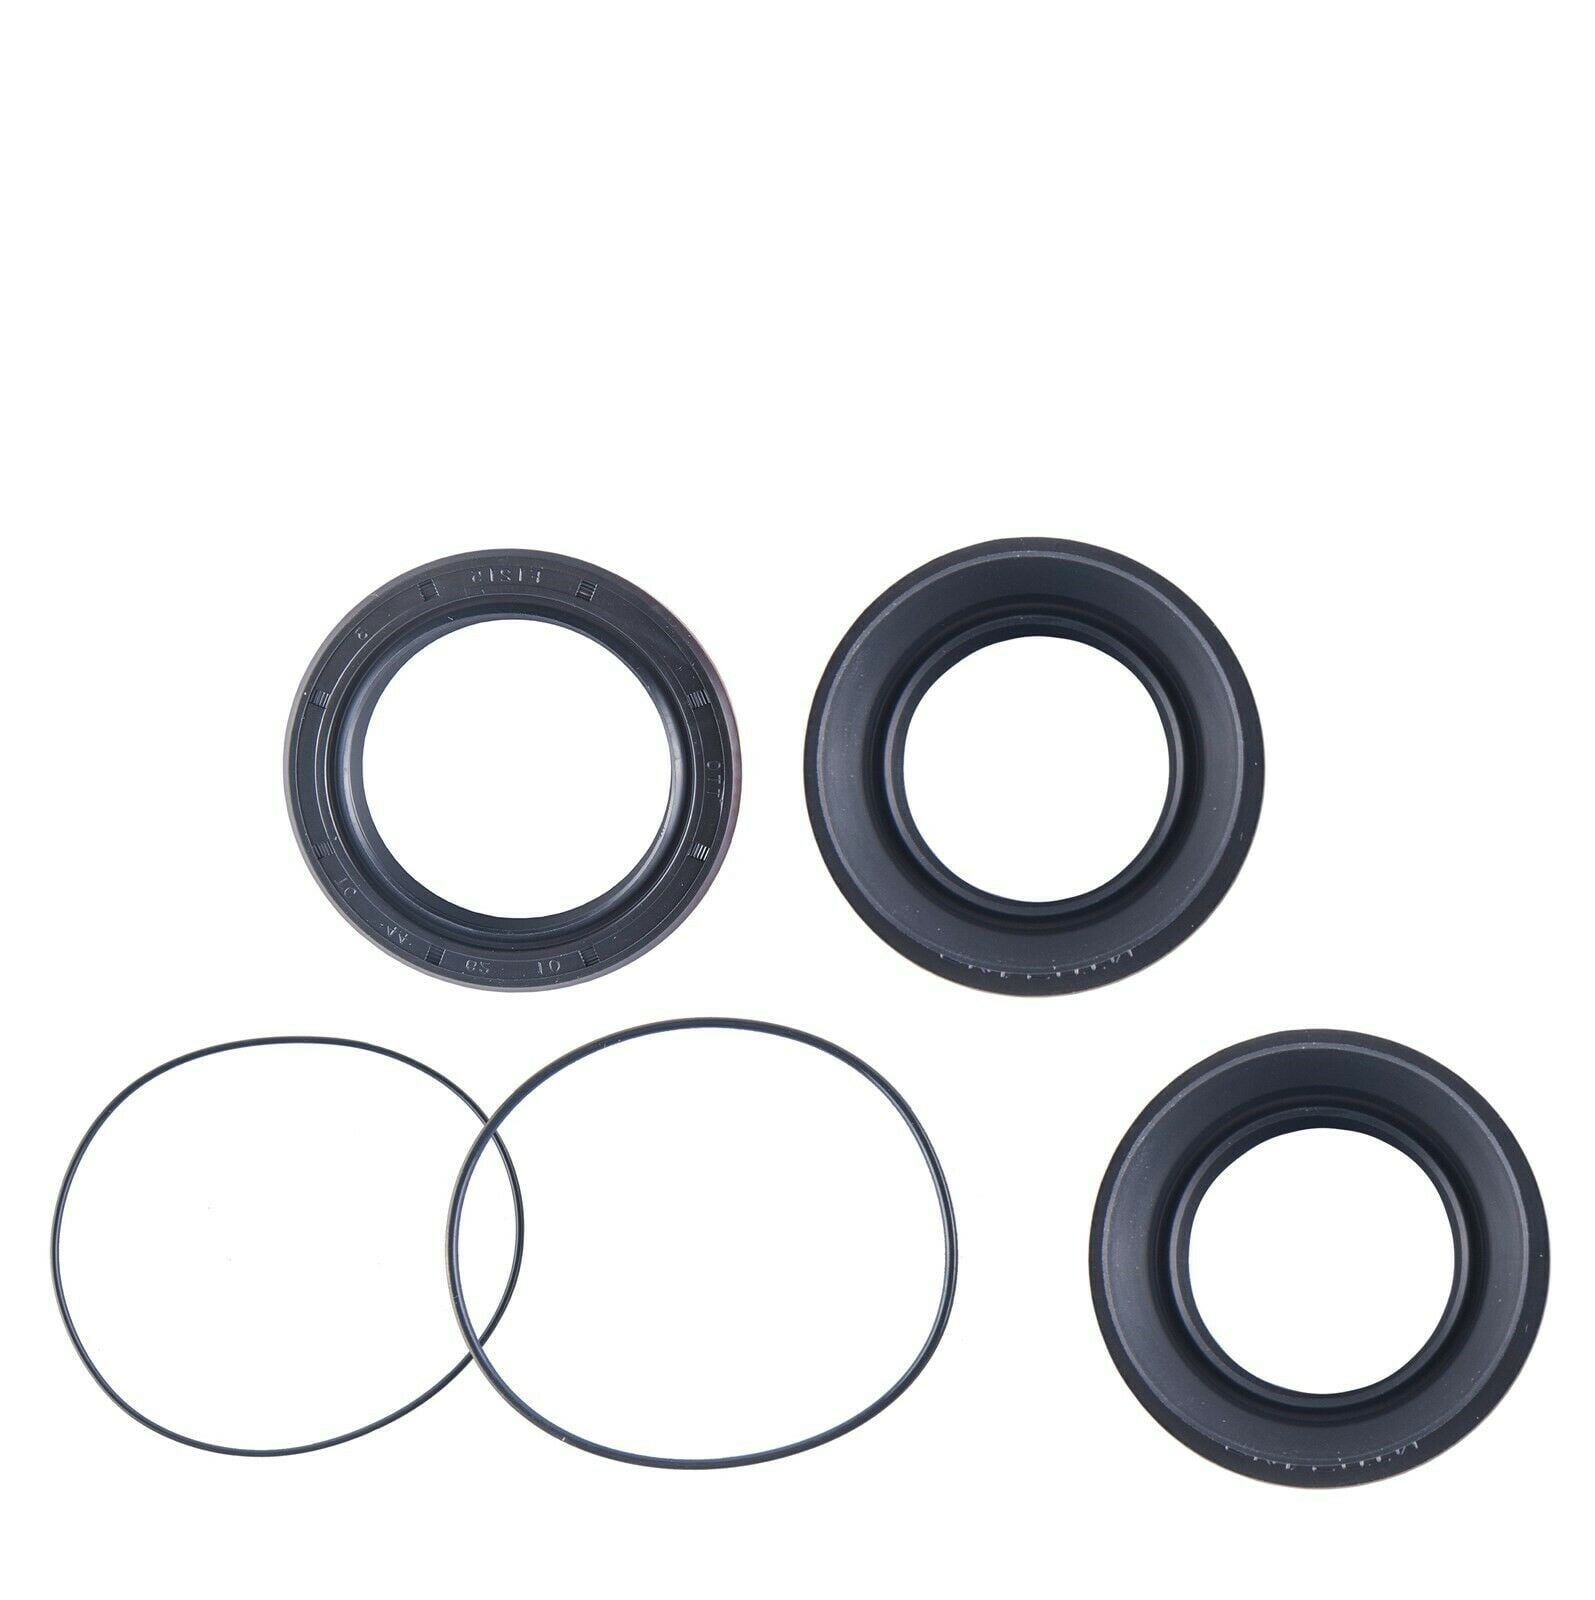 700 Viking East Lake Axle front differential seal kit compatible with Yamaha 700 Rhino 400 Big Bear 08-15 